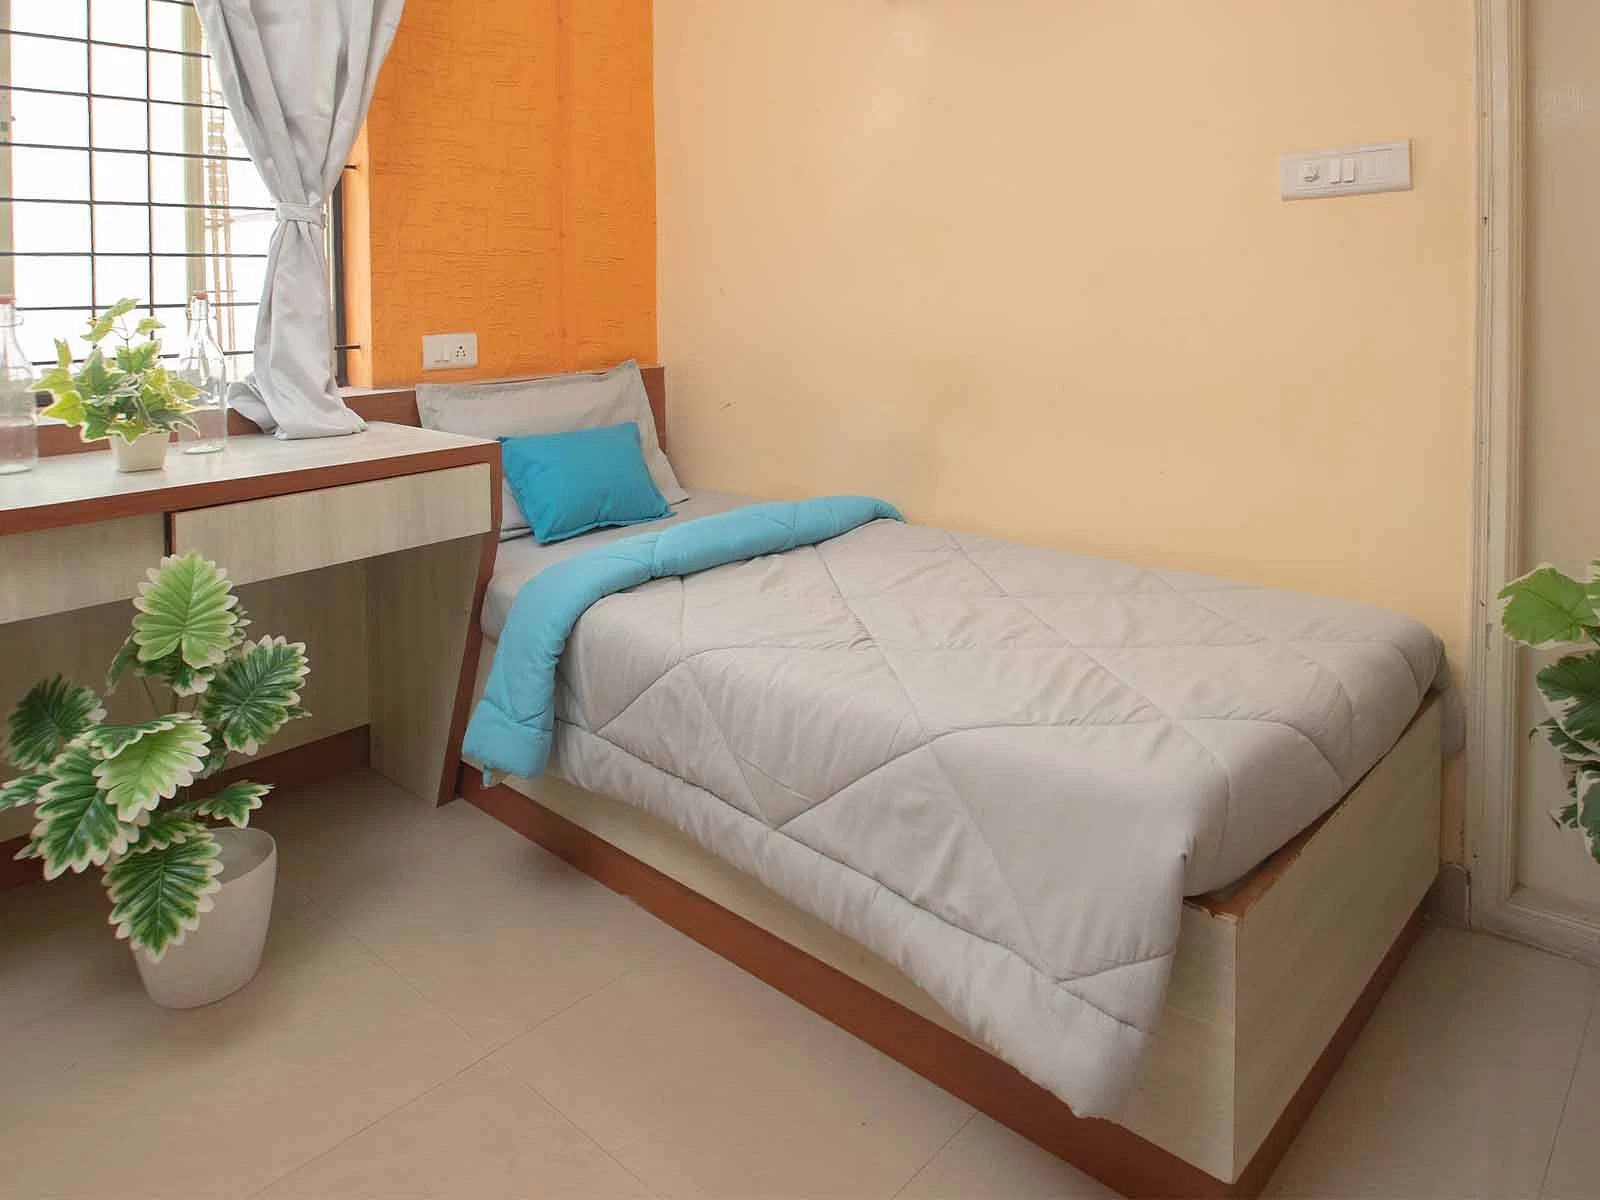 pgs in Bannerghatta with Daily housekeeping facilities and free Wi-Fi-Zolo Heaven